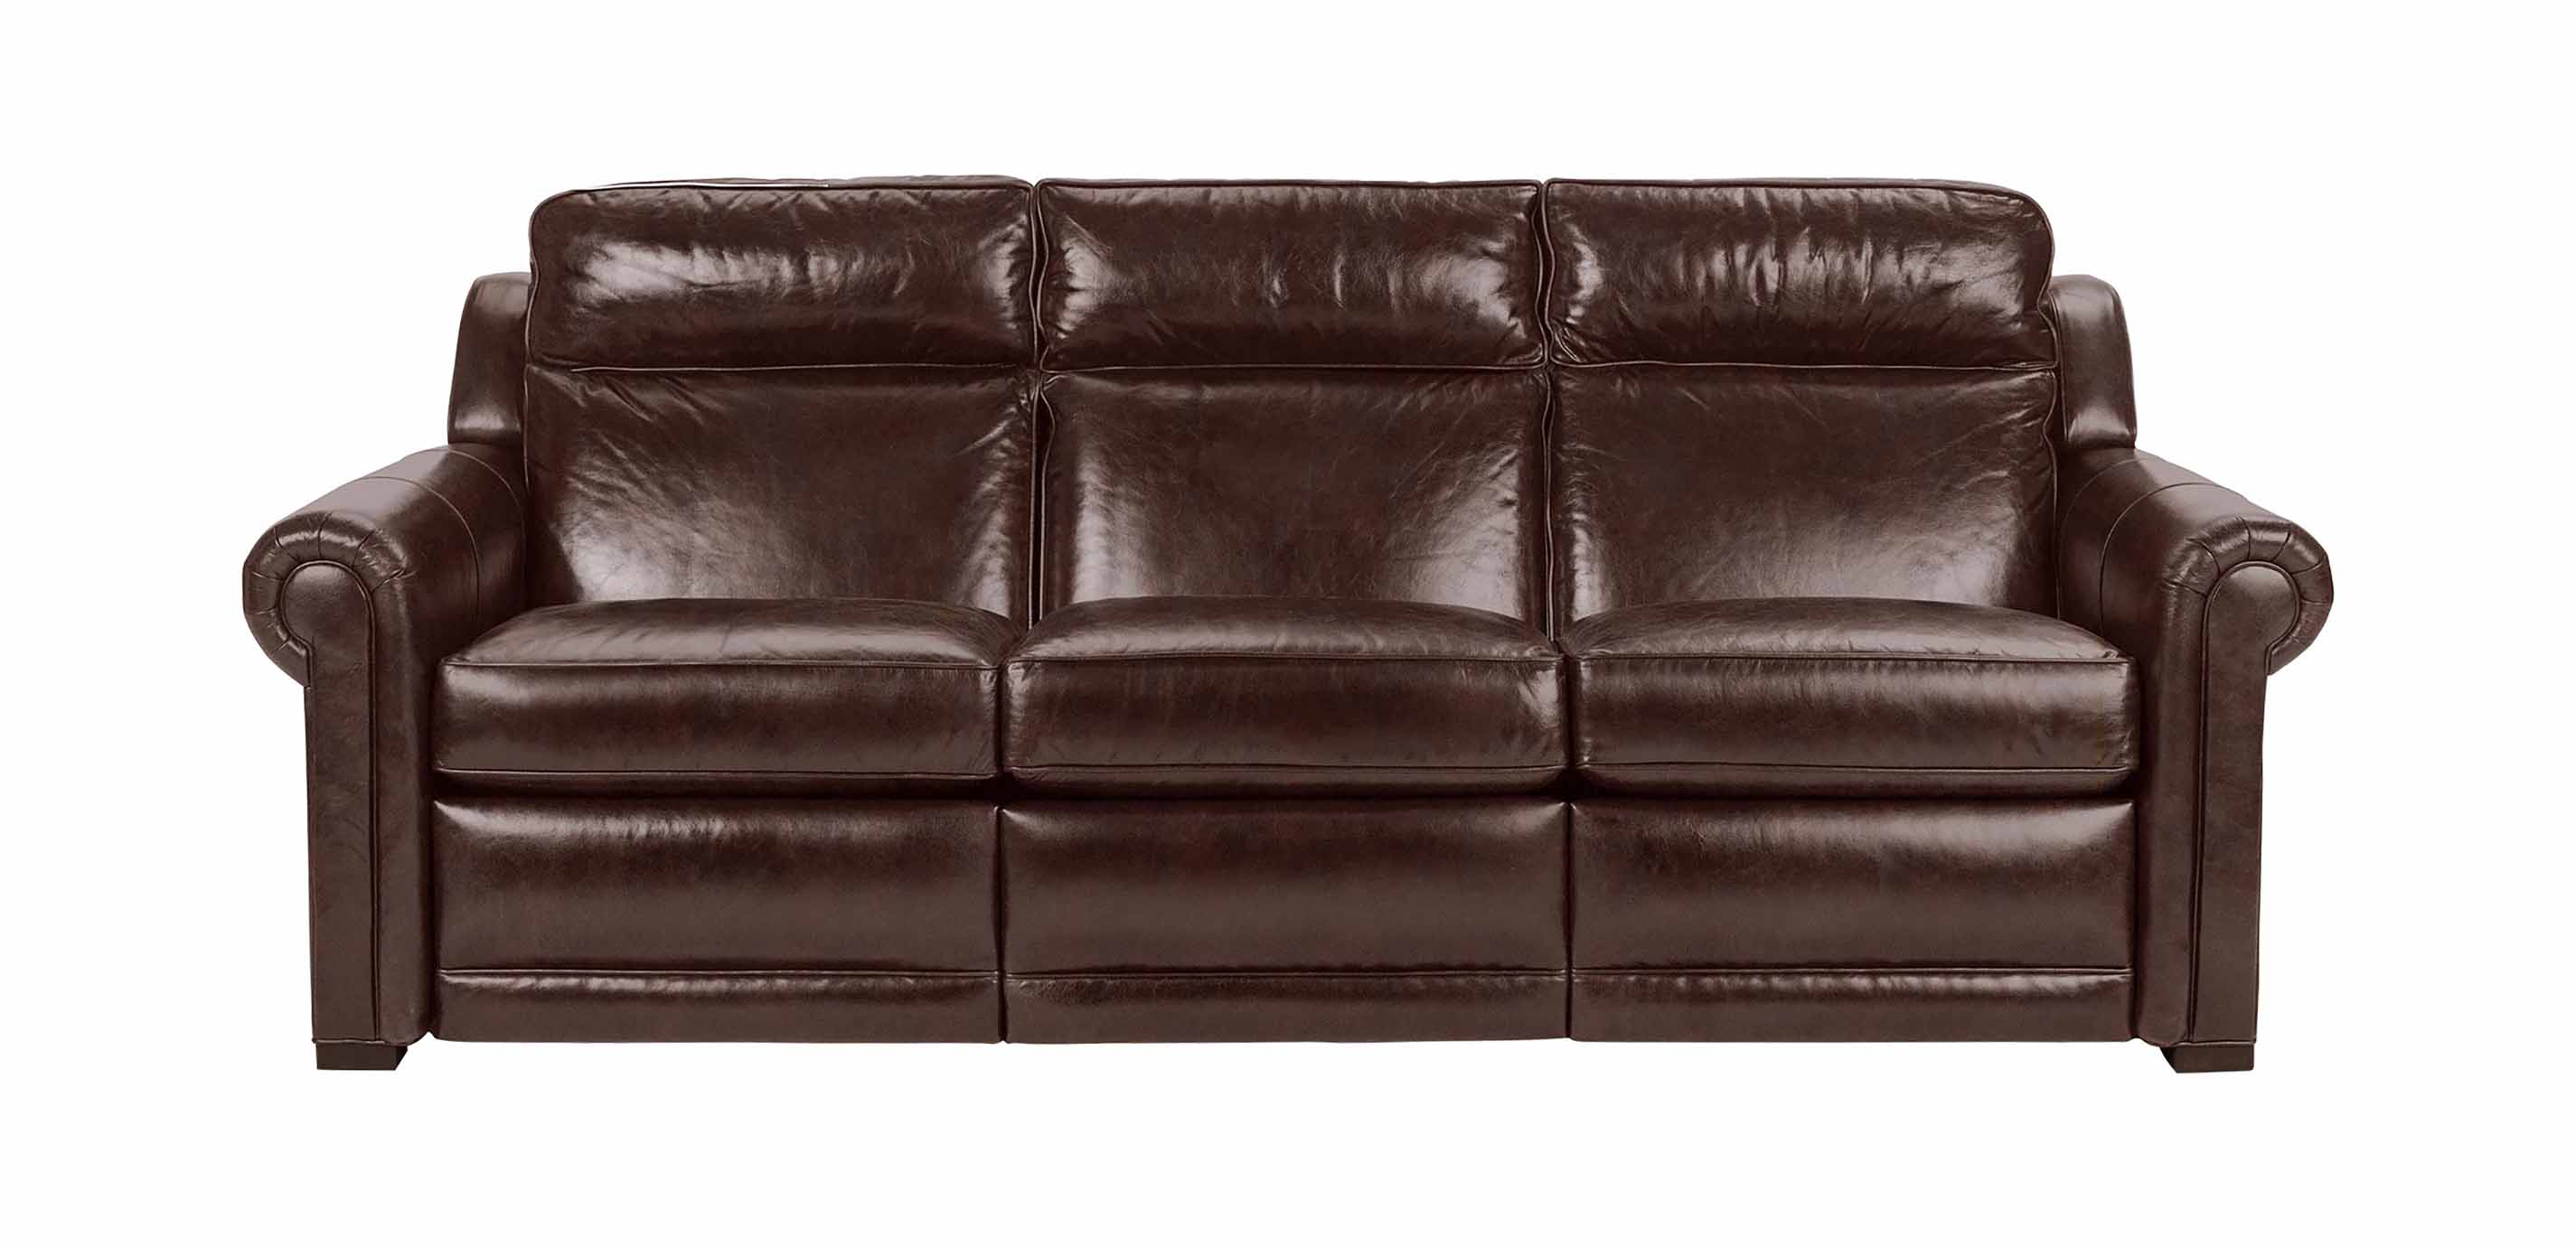 leather incline sofa chair